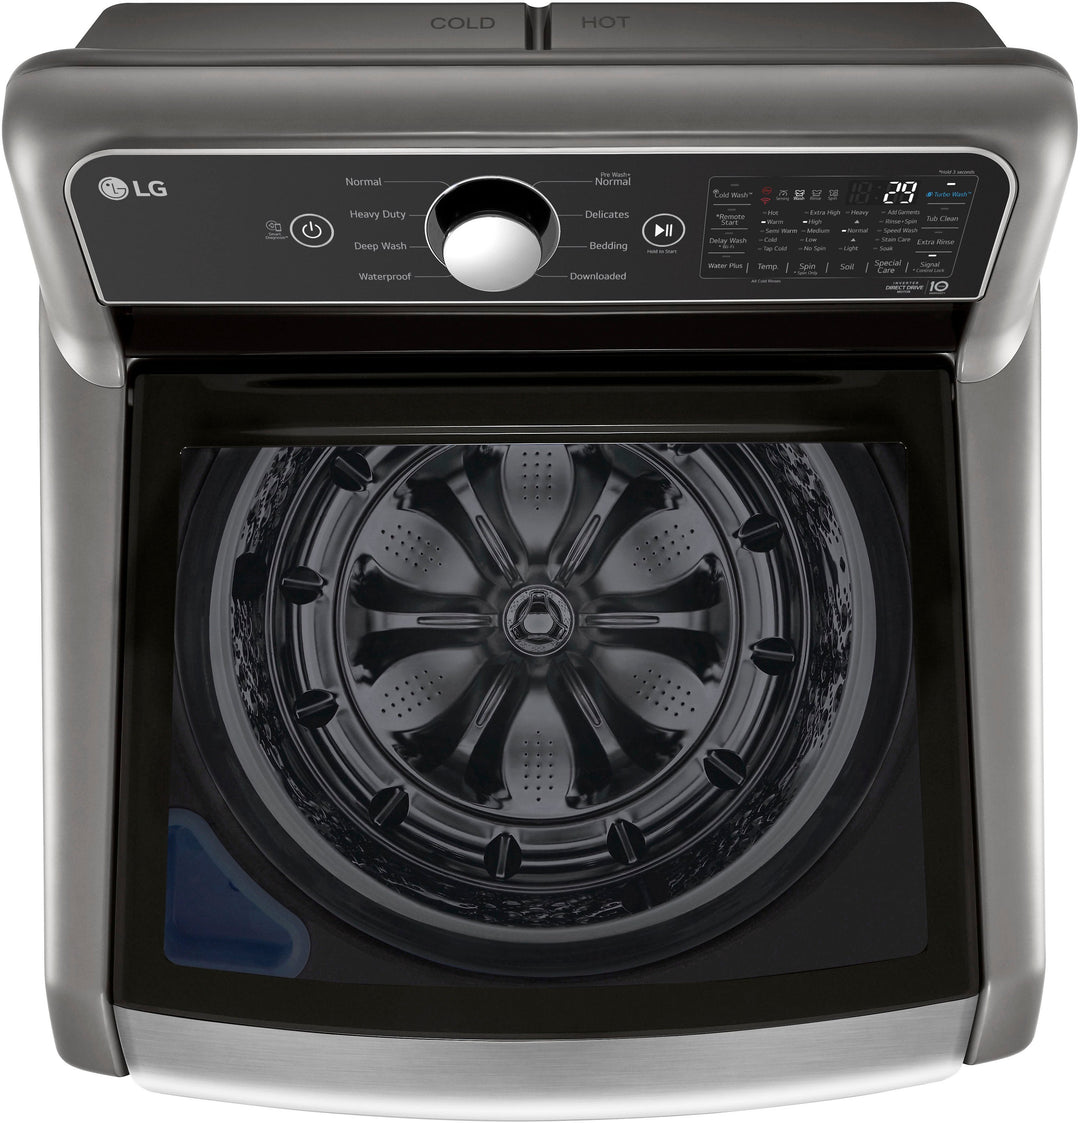 LG - 5.5 Cu. Ft. Smart Top Load Washer with TurboWash3D - Graphite steel_7